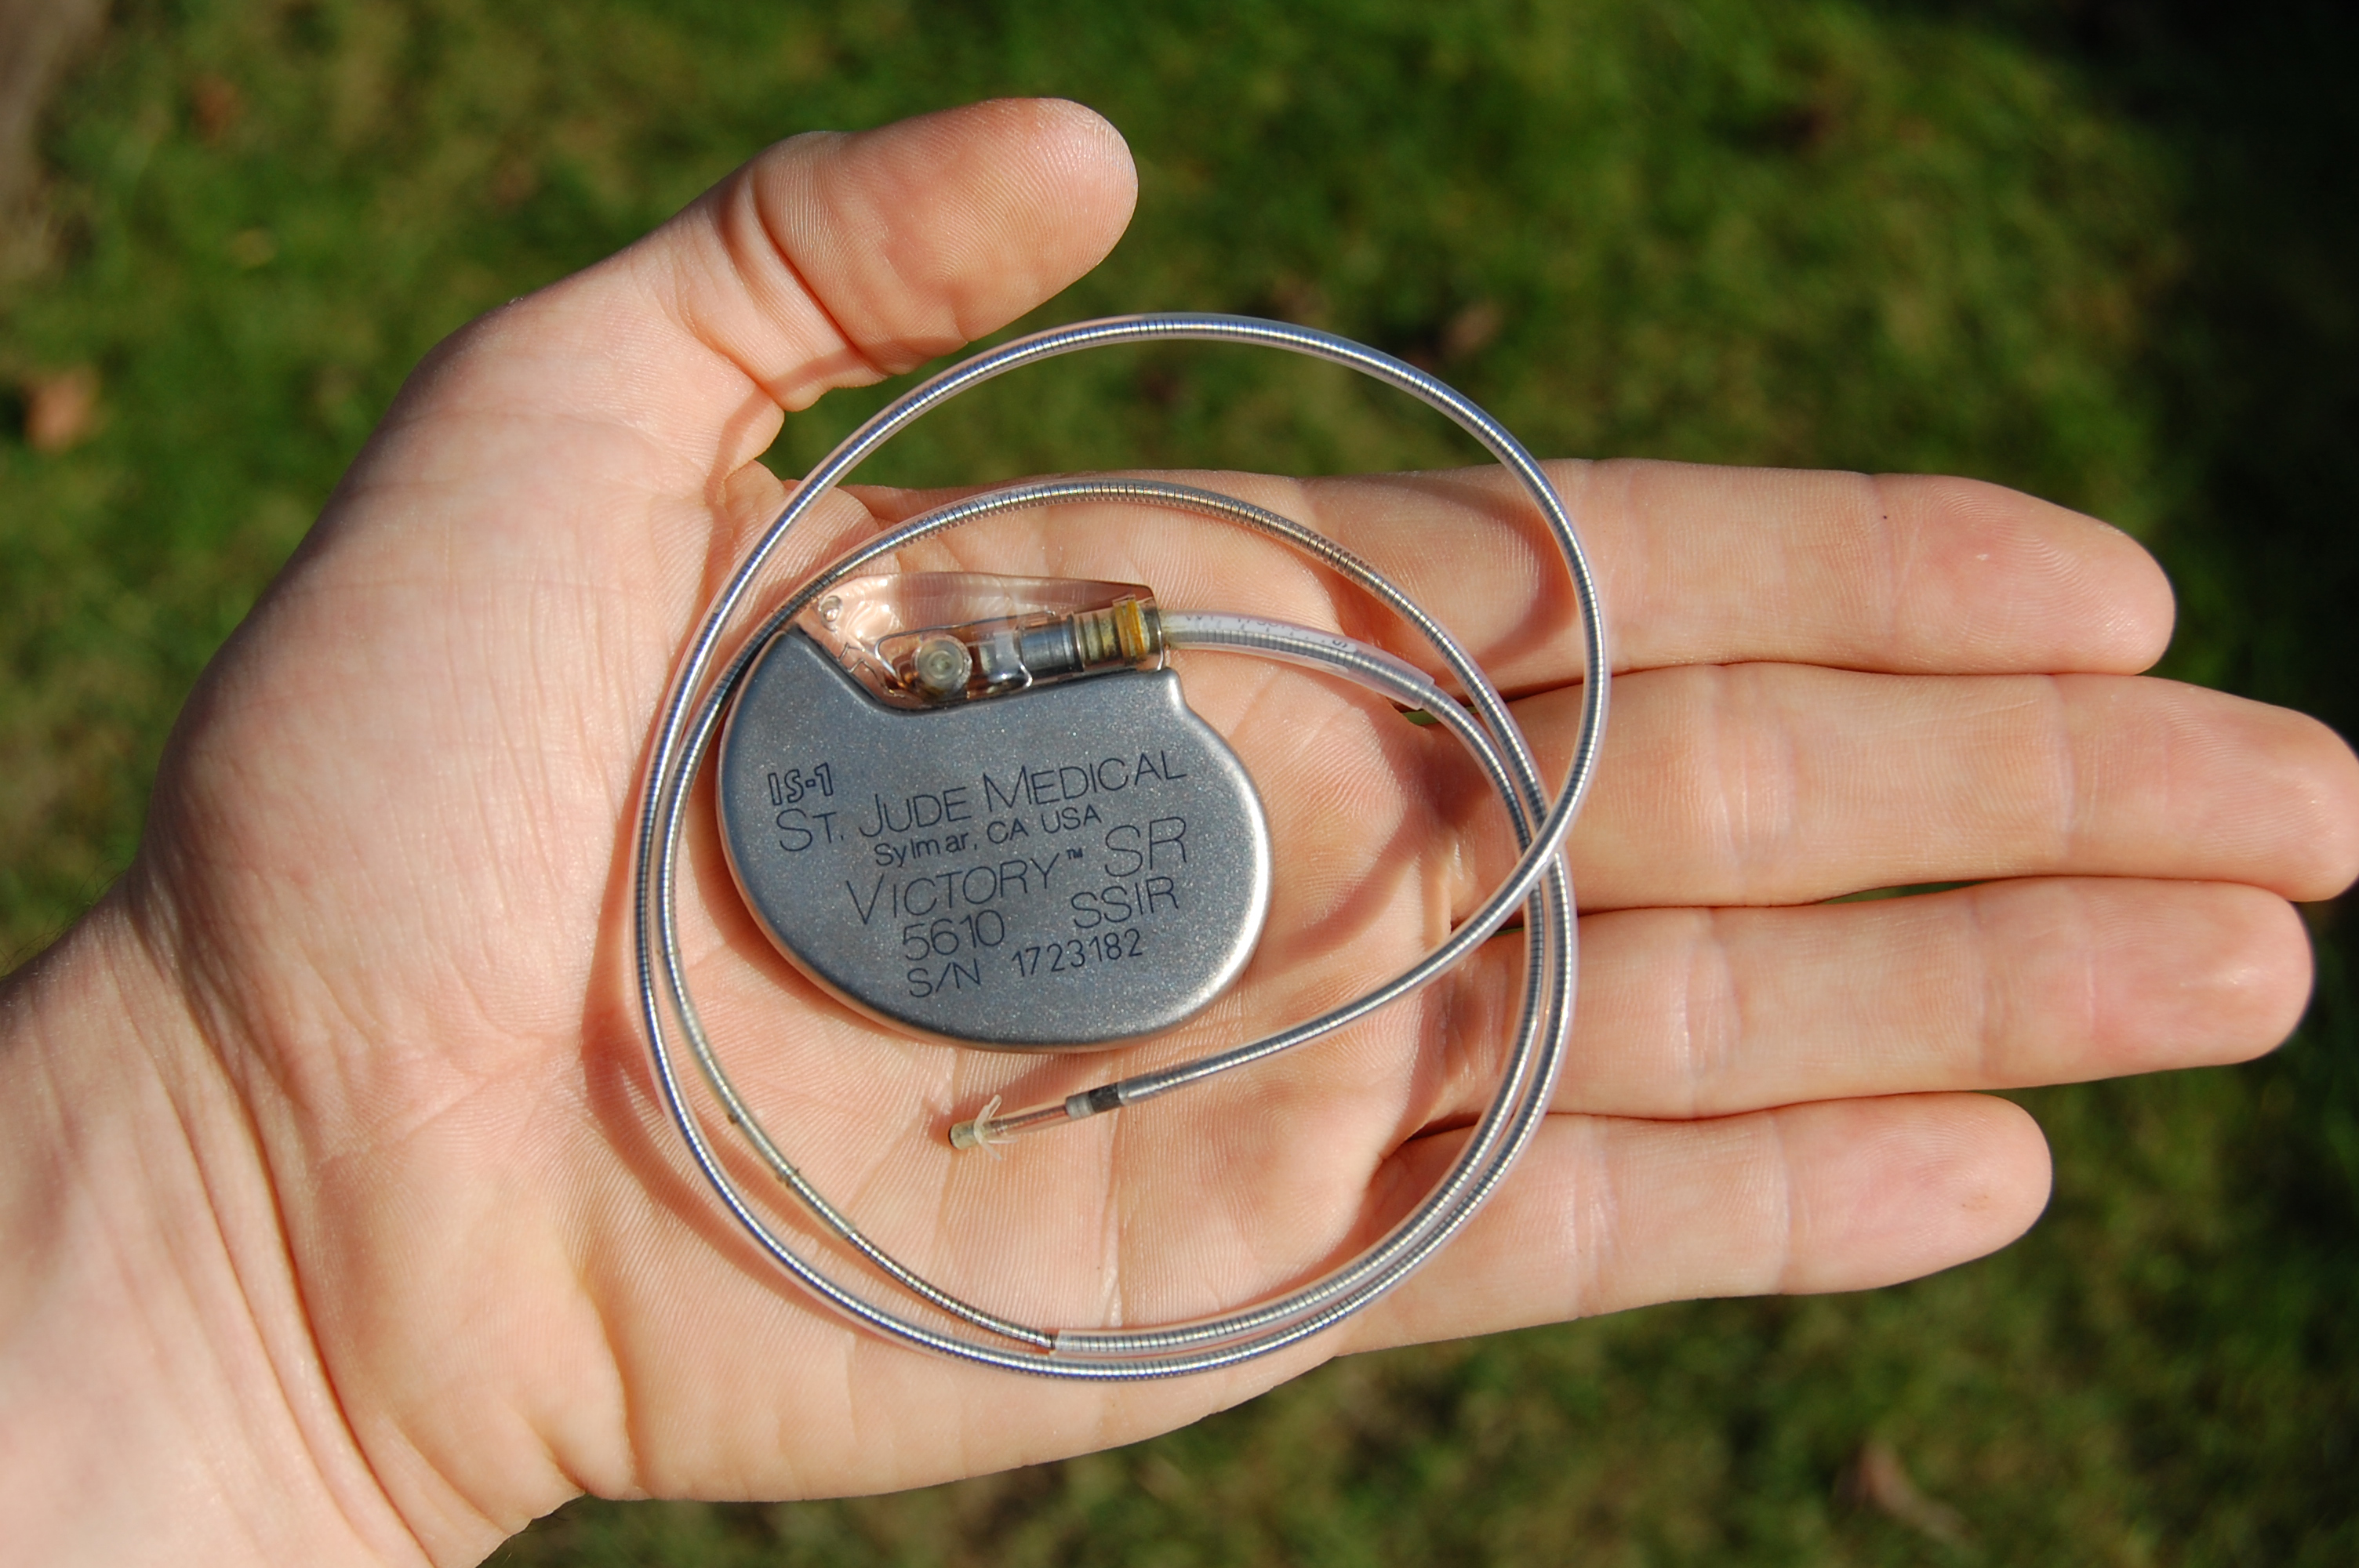 St Jude Medical pacemaker in hand